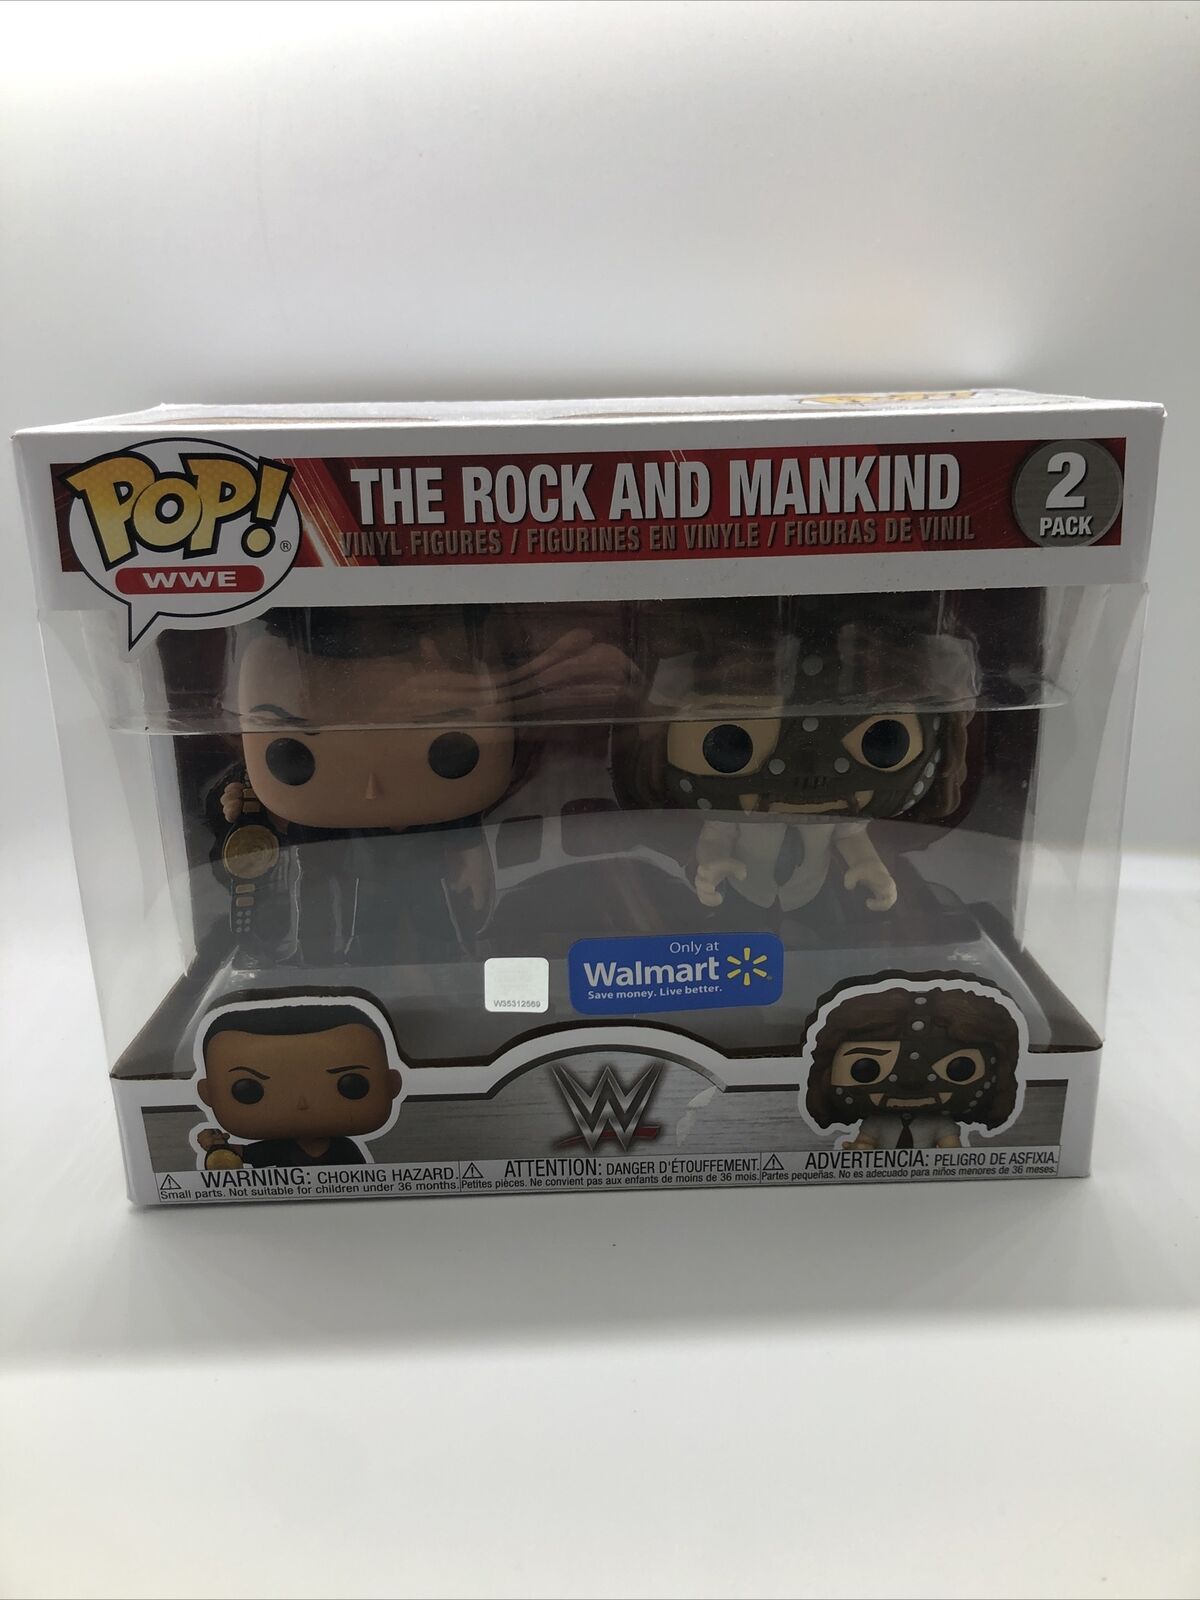 The Rock And Mankind Funko Pop 2 Pack (Walmart)